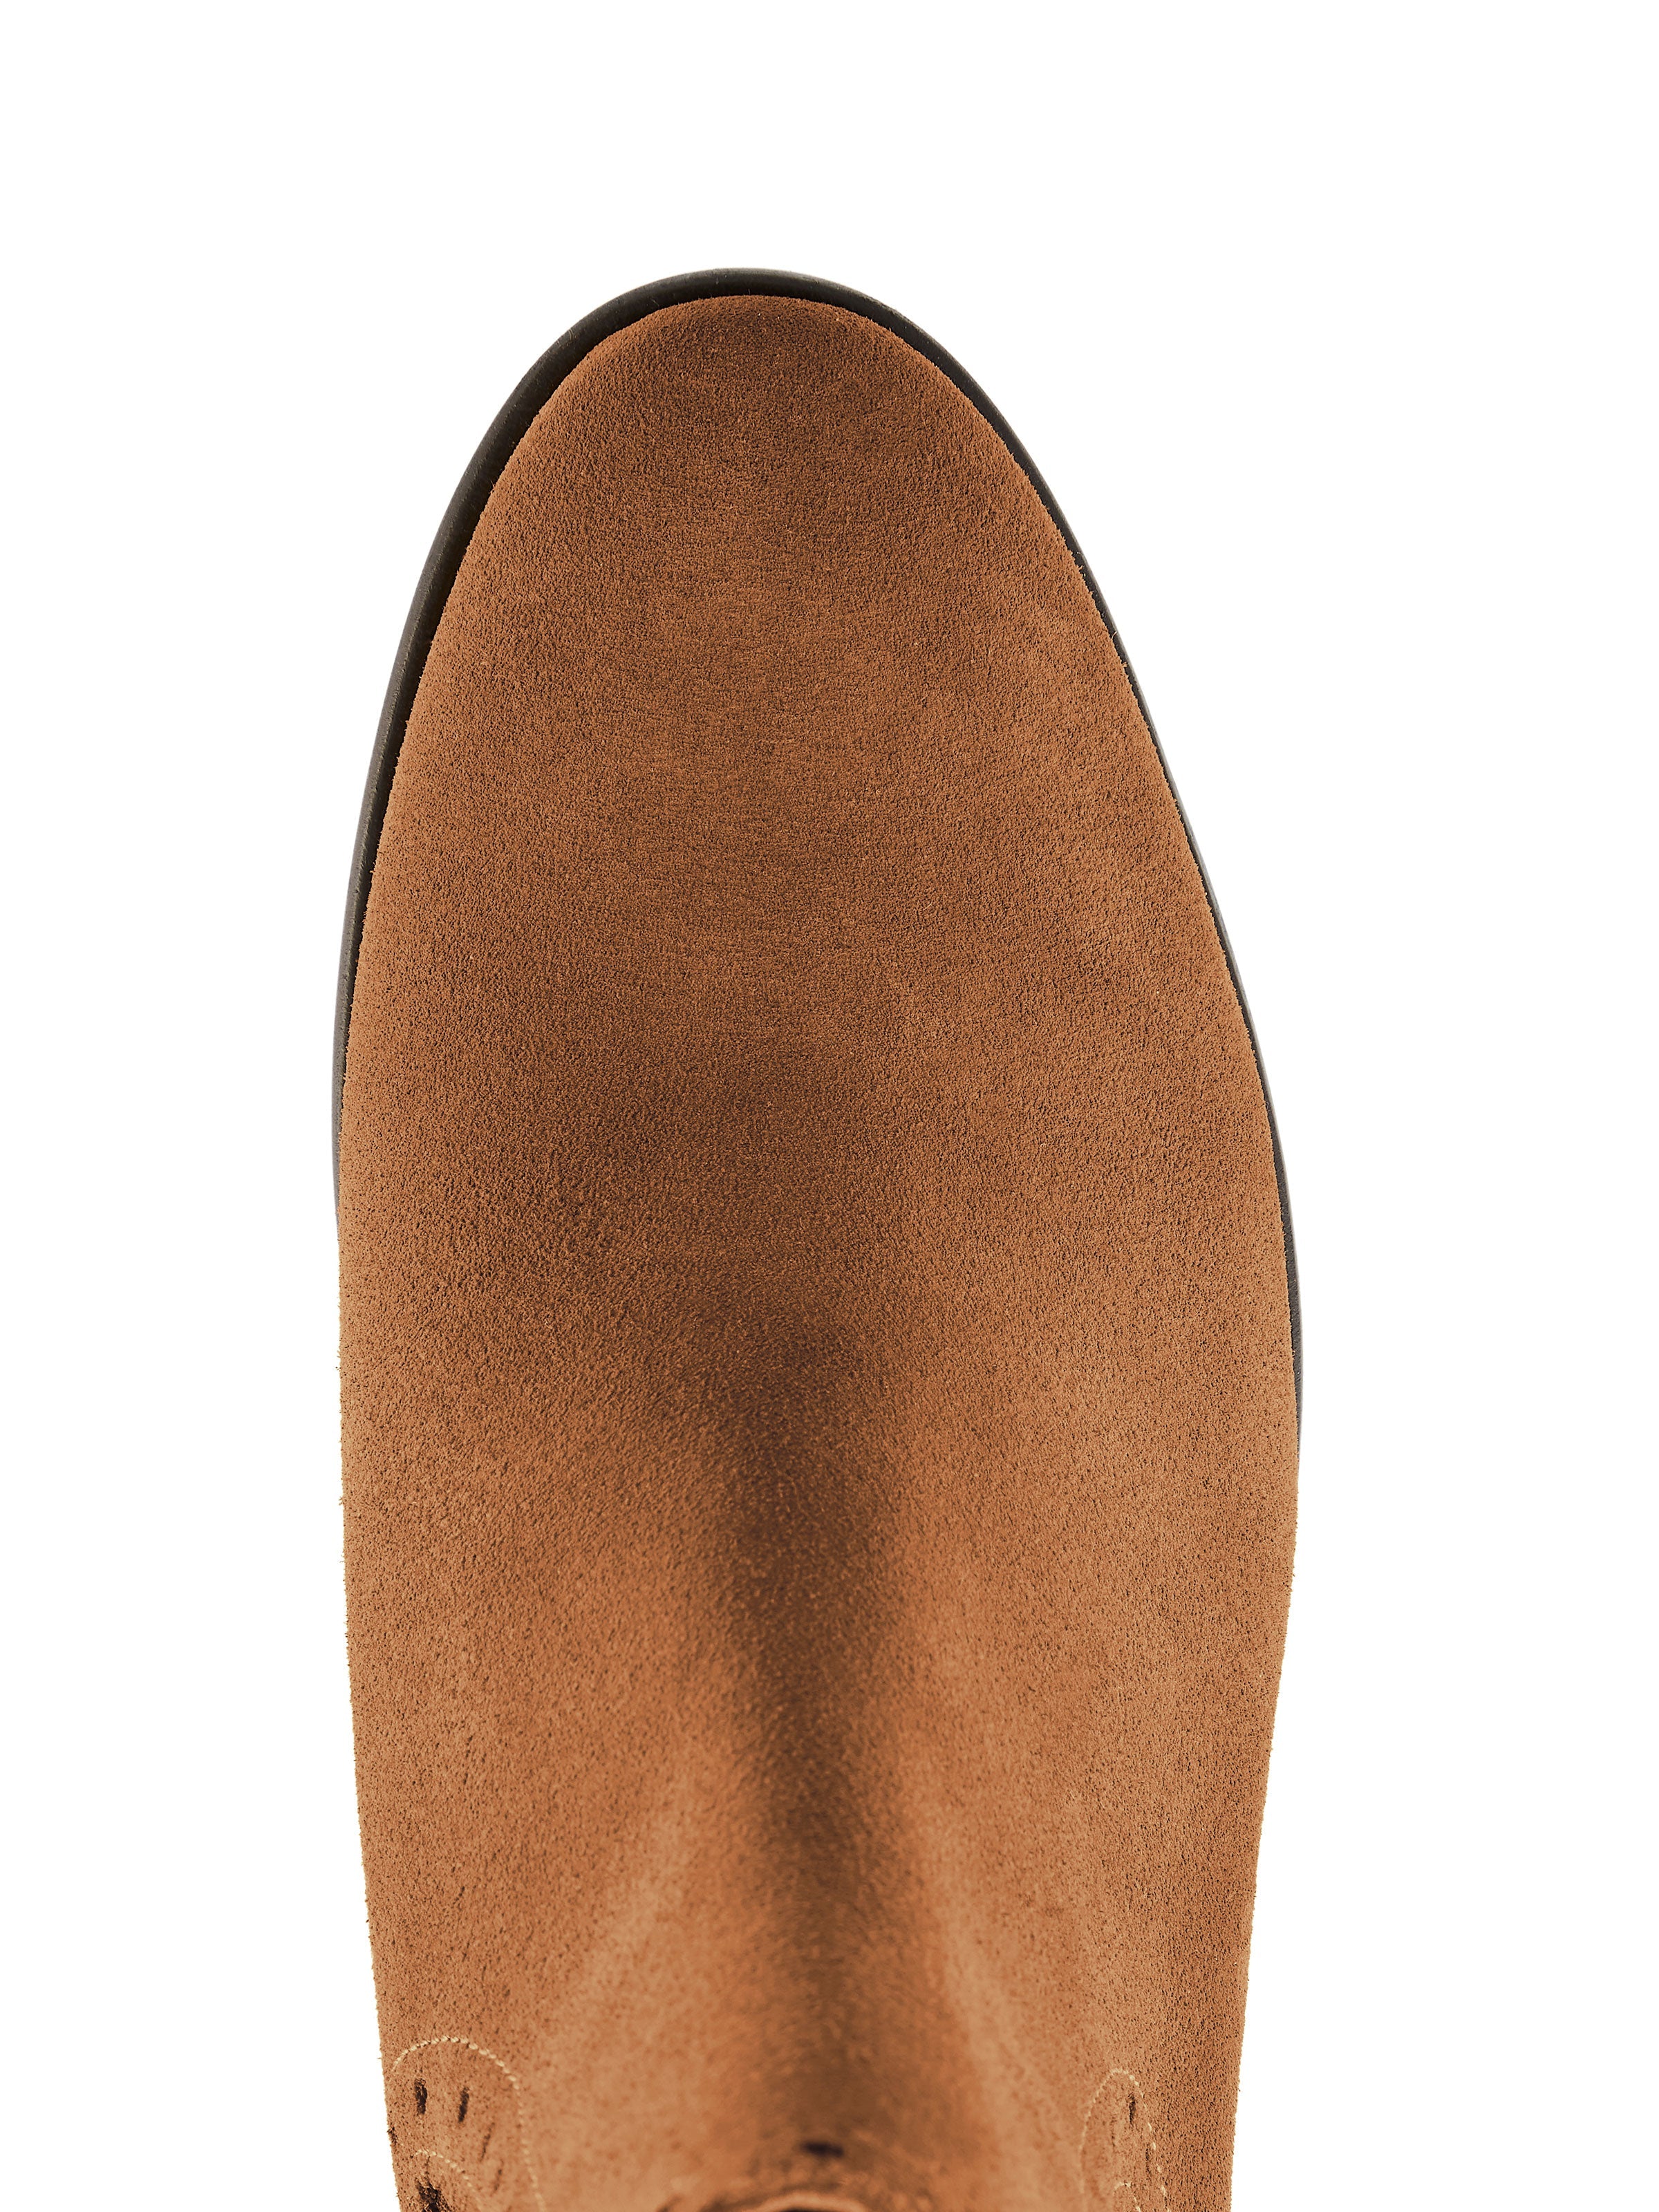 The Brogued Chelsea Boot - Tan Suede